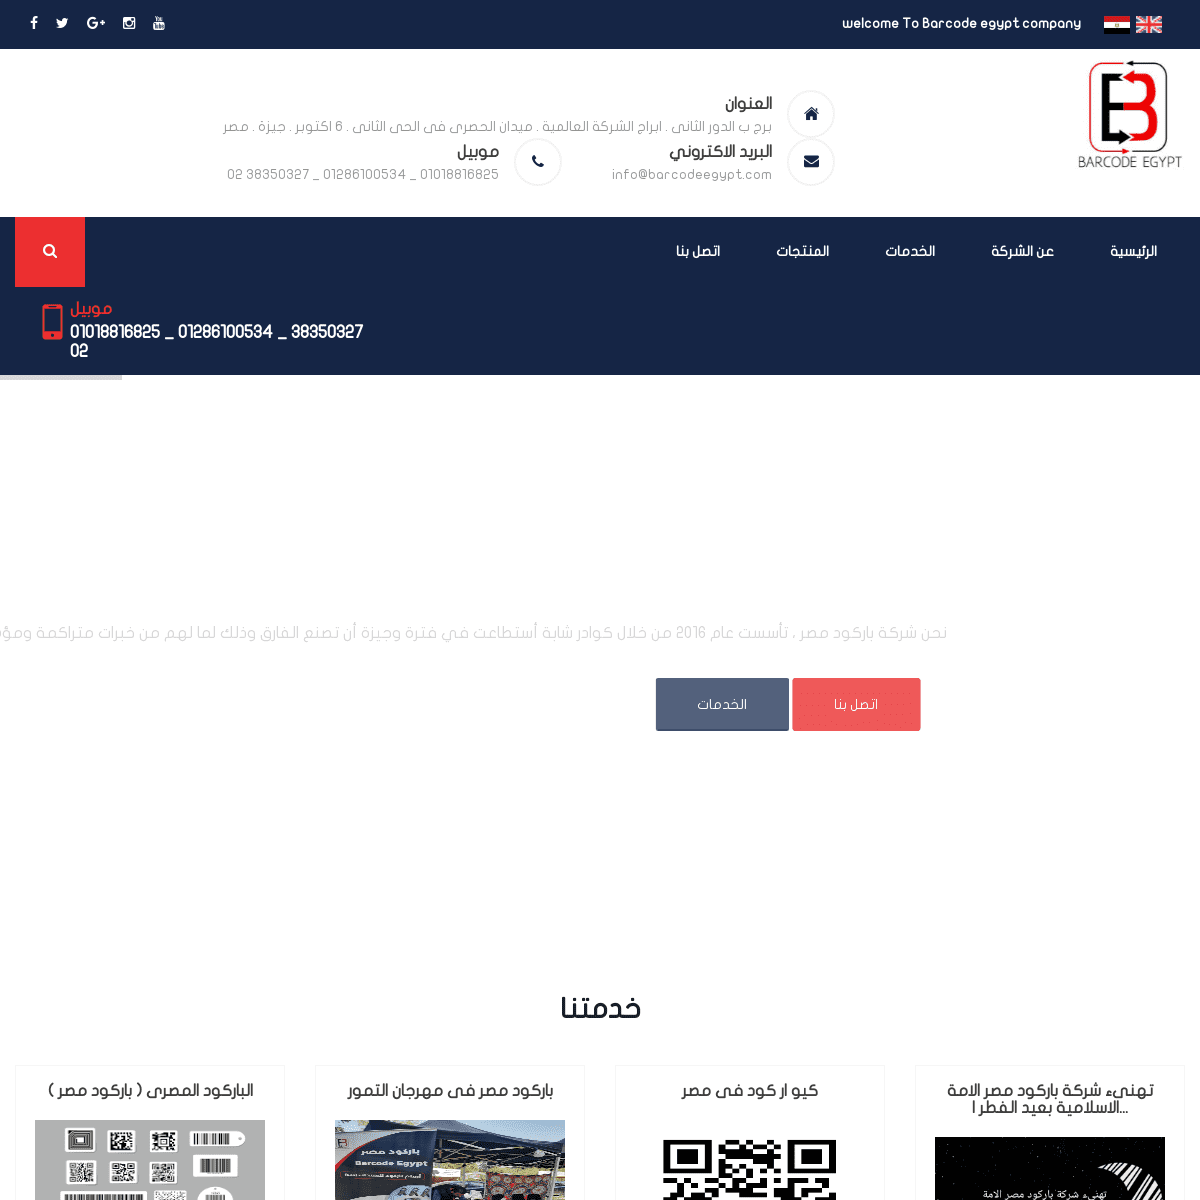 A complete backup of https://barcodeegypt.com